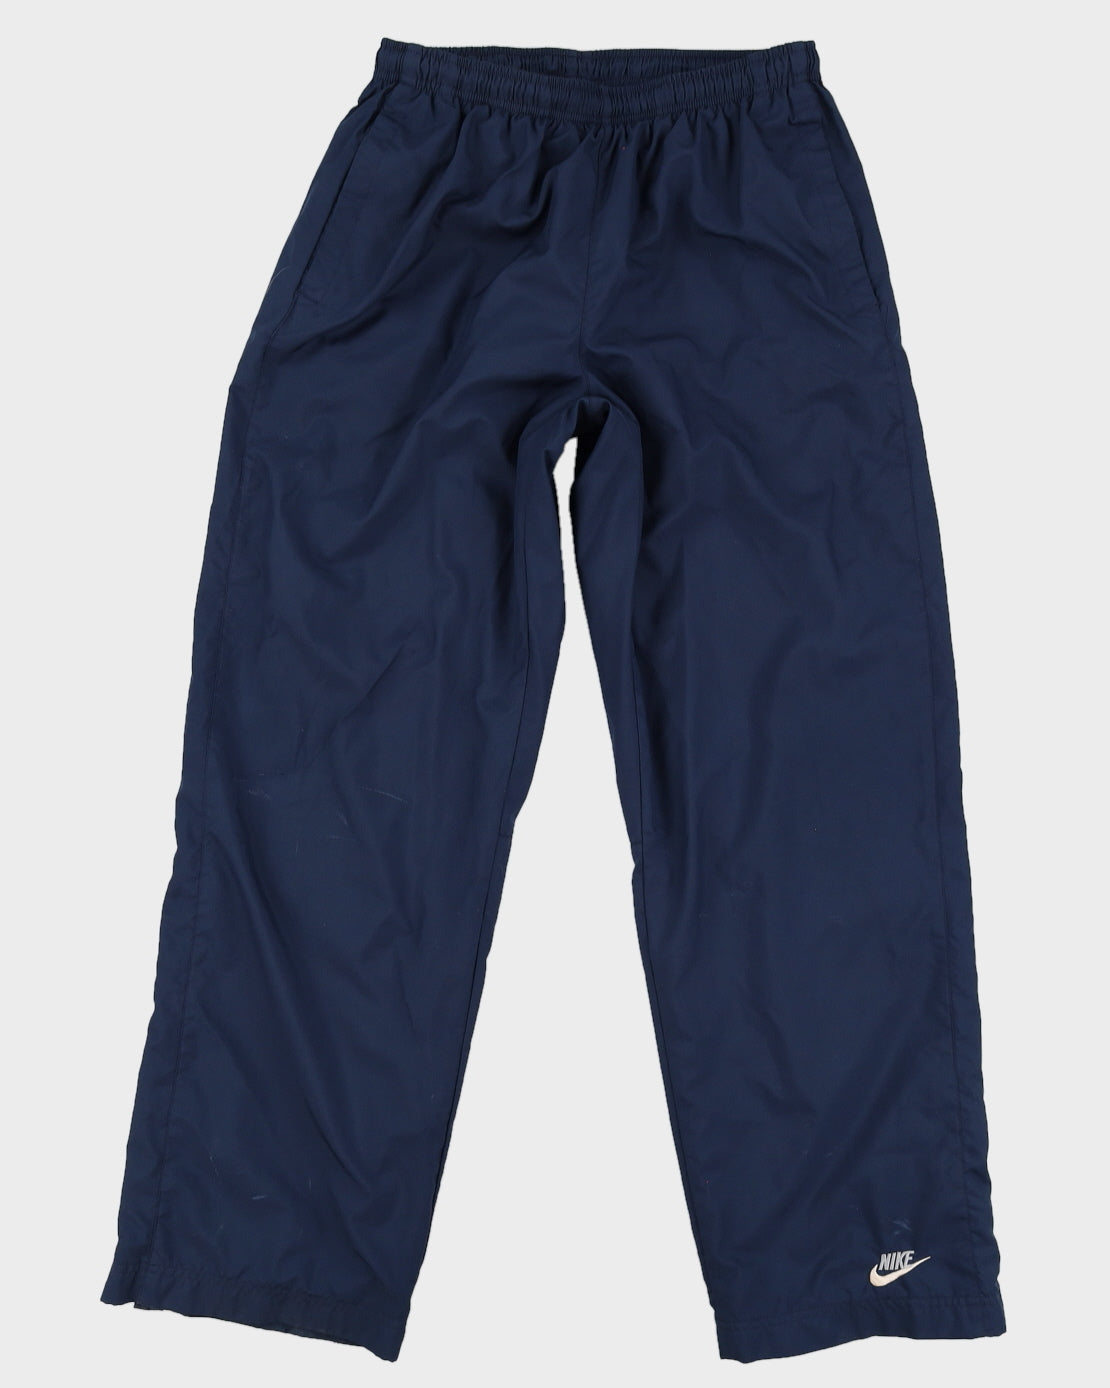 00s Y2K Nike Tracksuit Bottoms - M